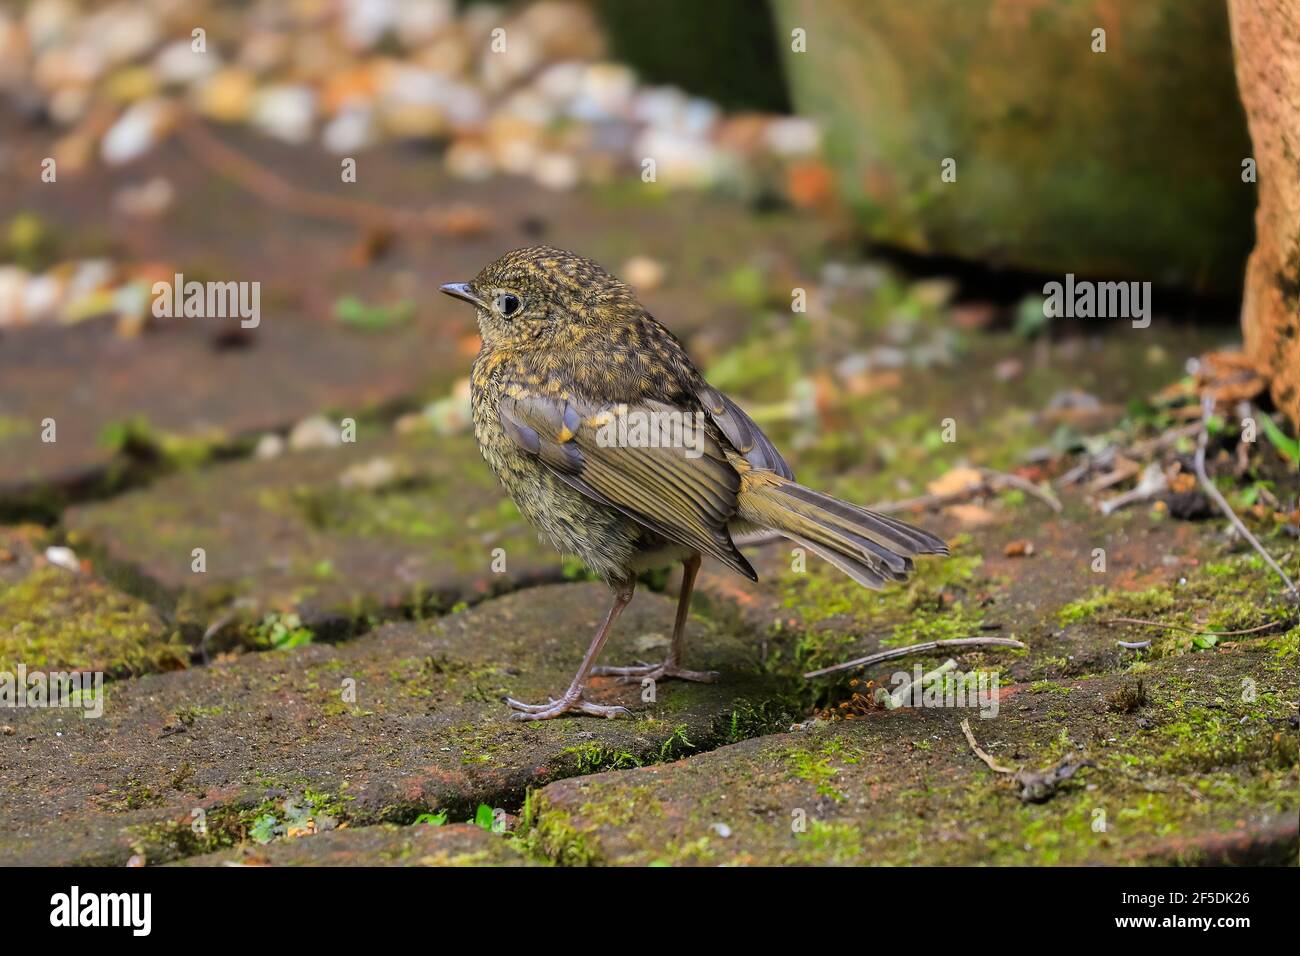 Juvenile or immature European robin (Erithacus rubecula) perched in a Chilterns Hills garden; Henley-on-Thames, Oxfordshire, UK Stock Photo